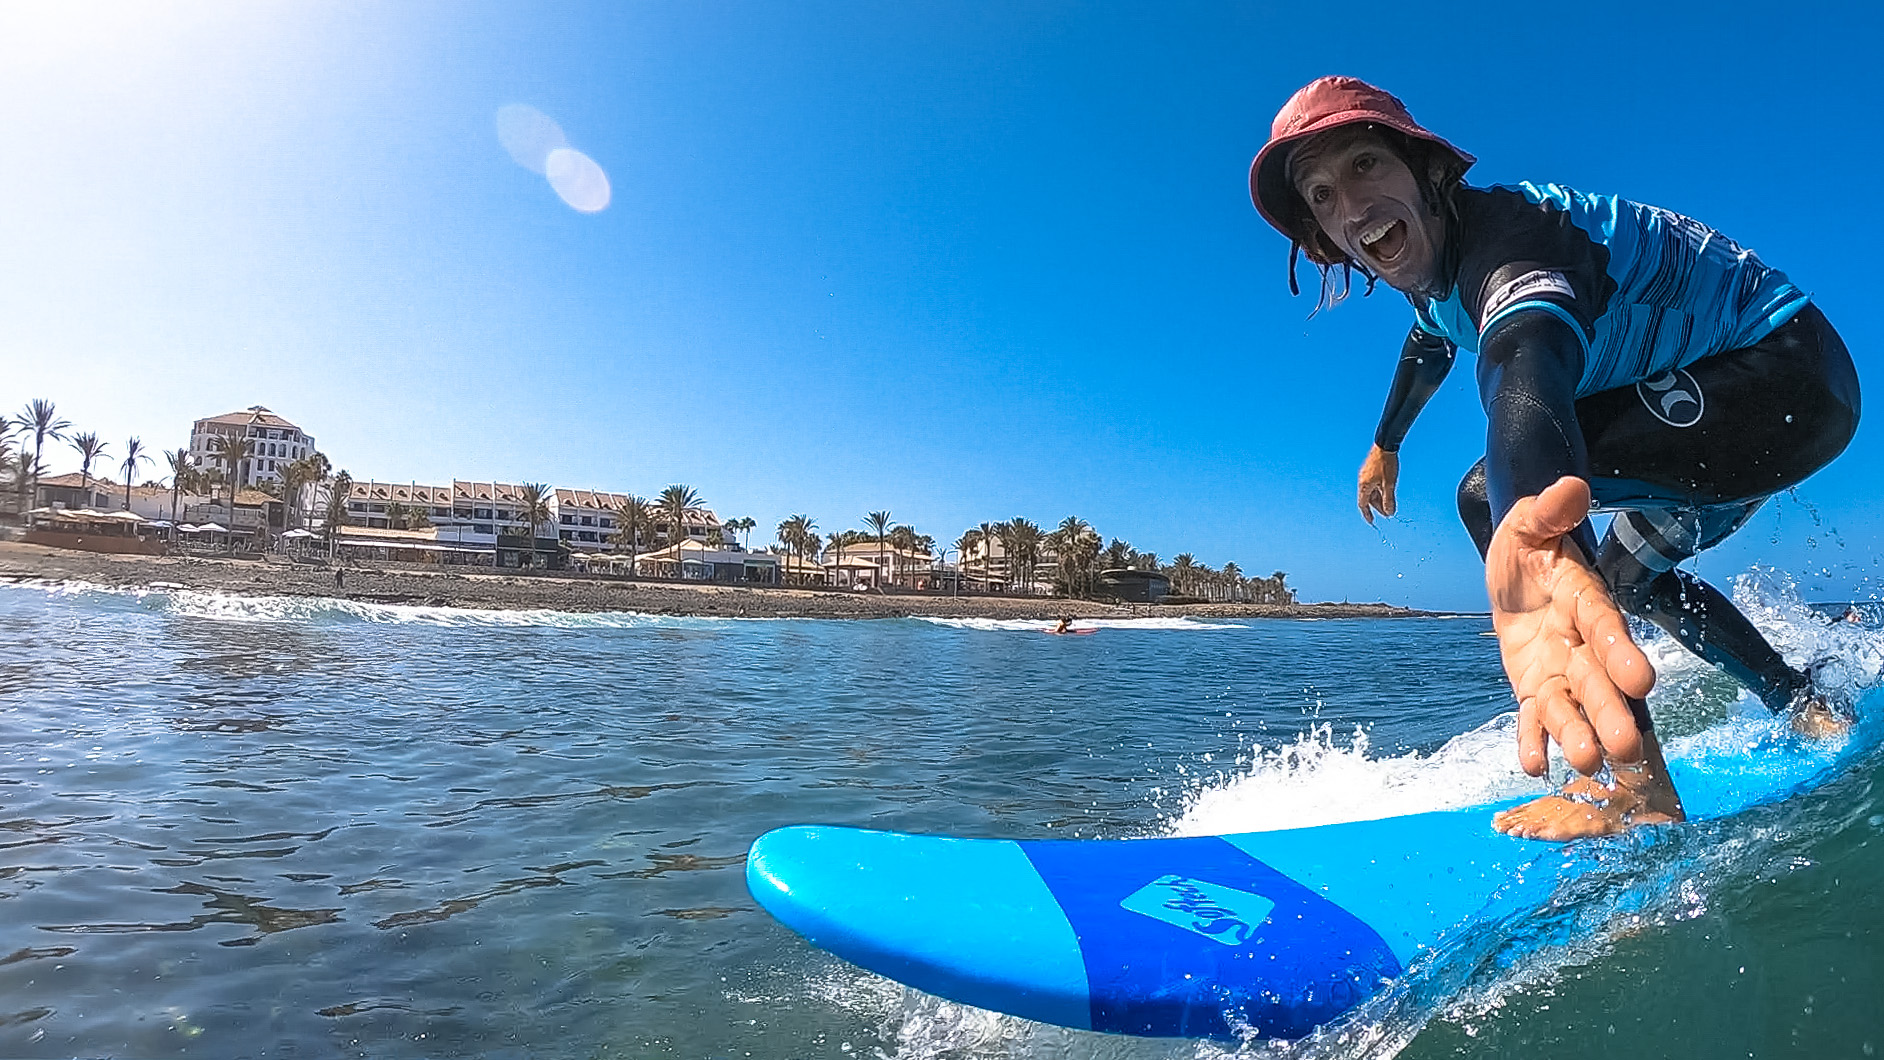 Blackstone Surf Center Team invites you to join our surf lessons everyday for beginners and intermediate surfers in Playa las Américas Tenerife